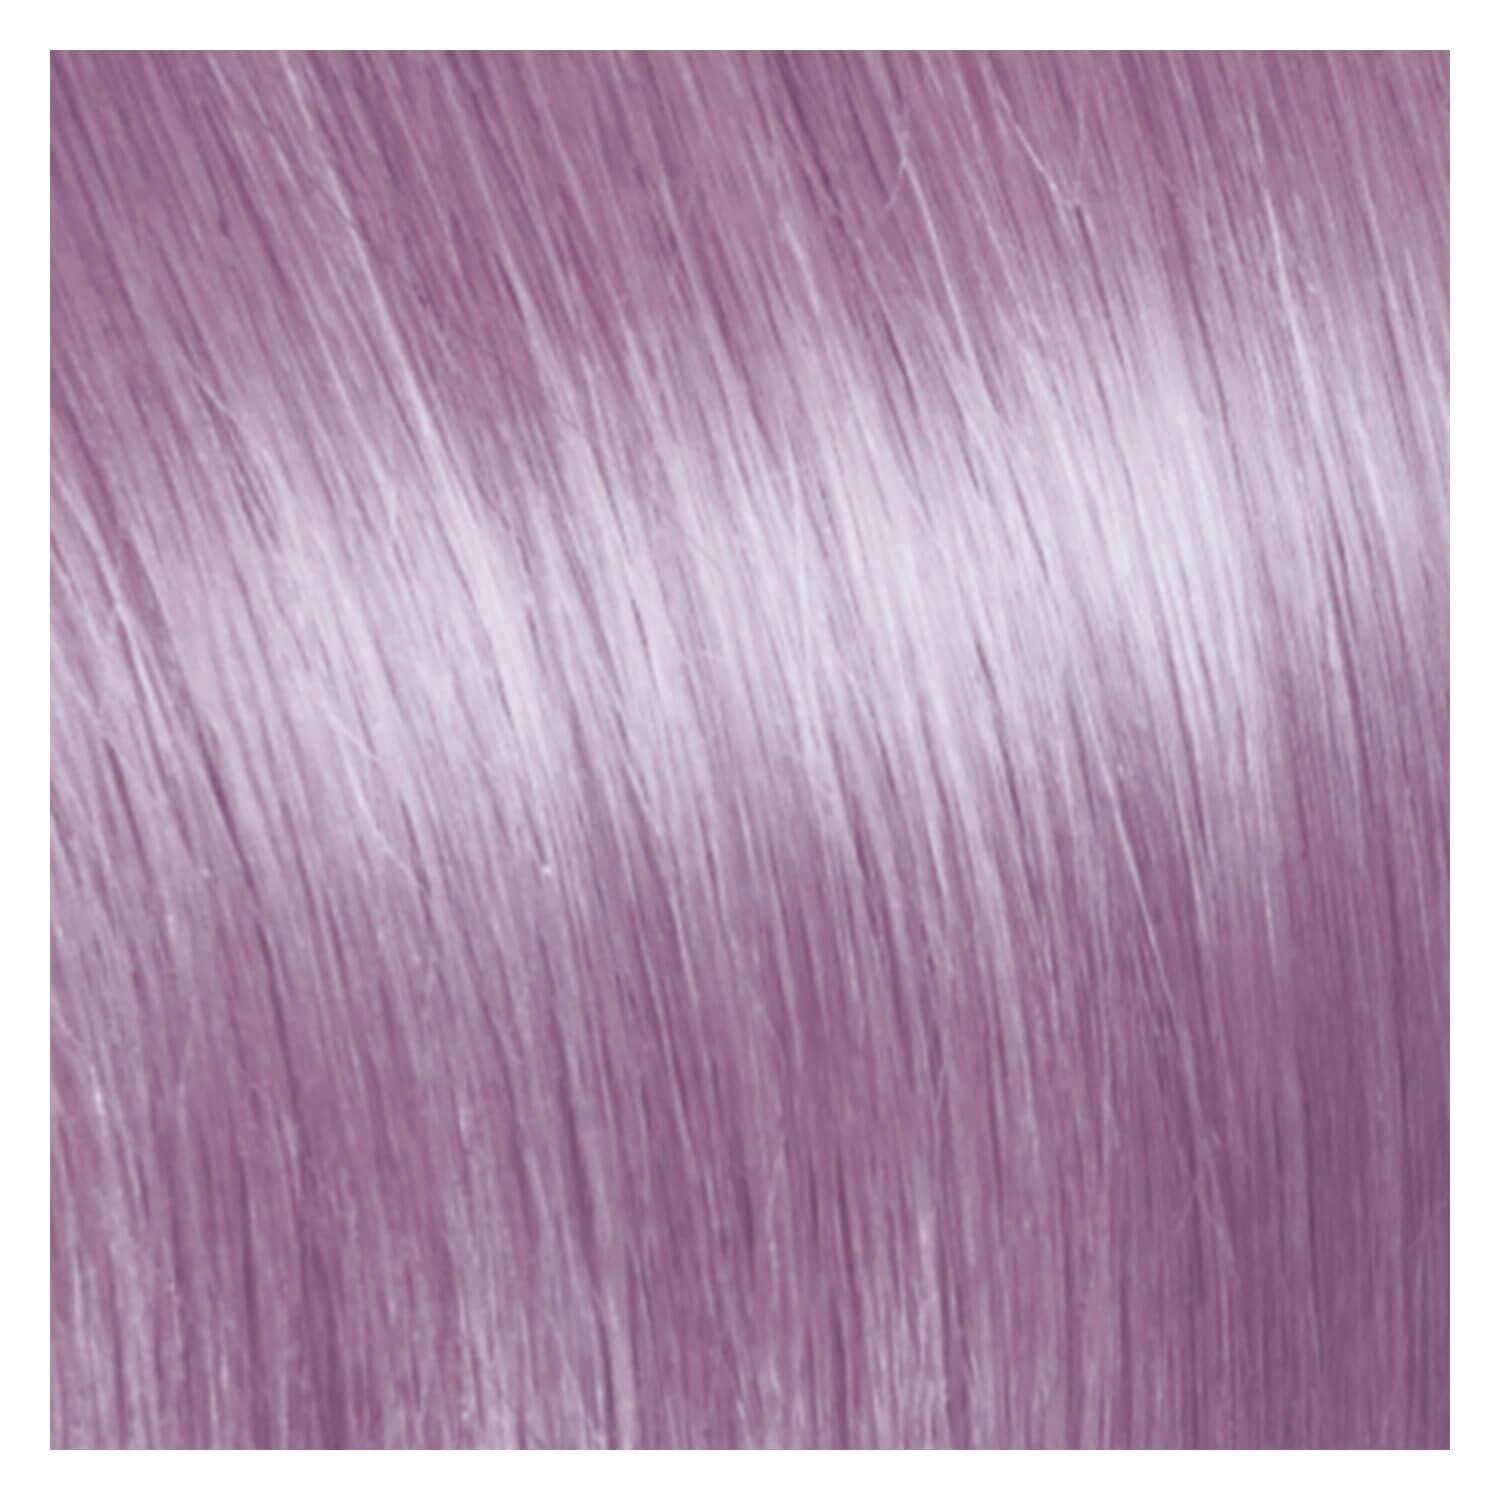 SHE Clip In-System Hair Extensions - Violet 40cm